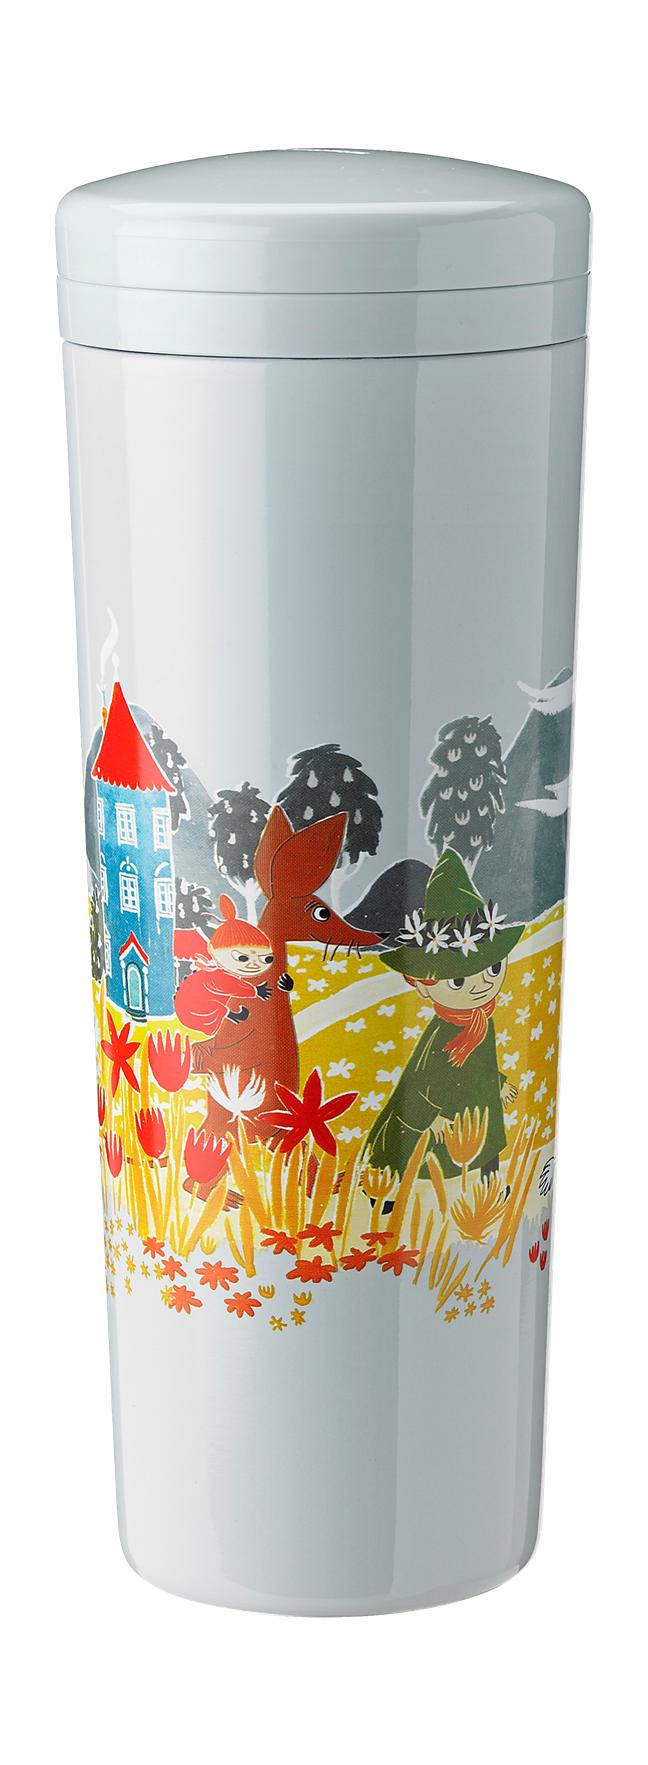 Stelton Carrie Thermo Bottle 0,5 L, Moomin Cloud